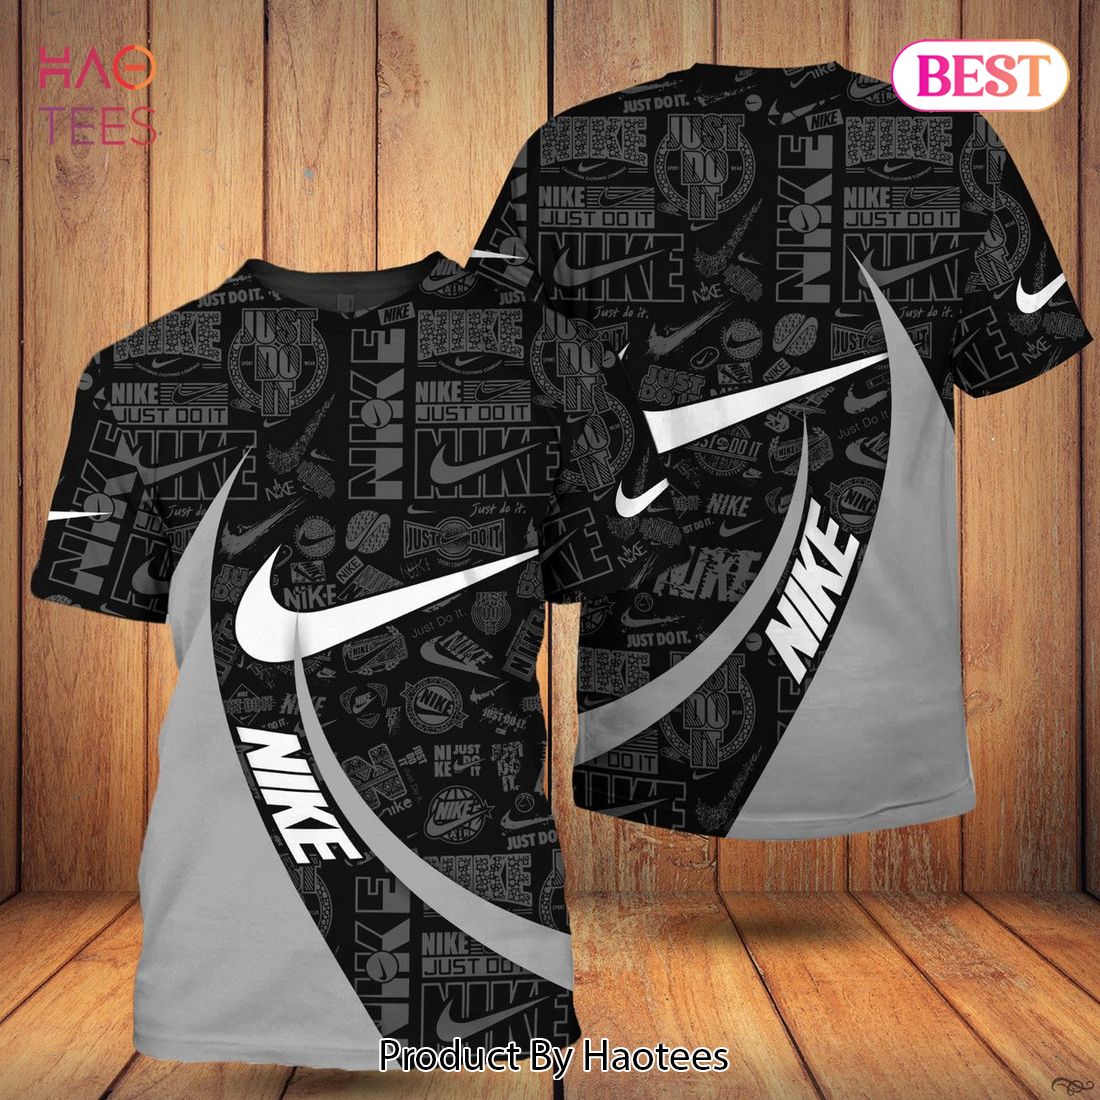 NEW Nike Full Printing Dark Color Luxury Brand 3D T-Shirt Limited Edition